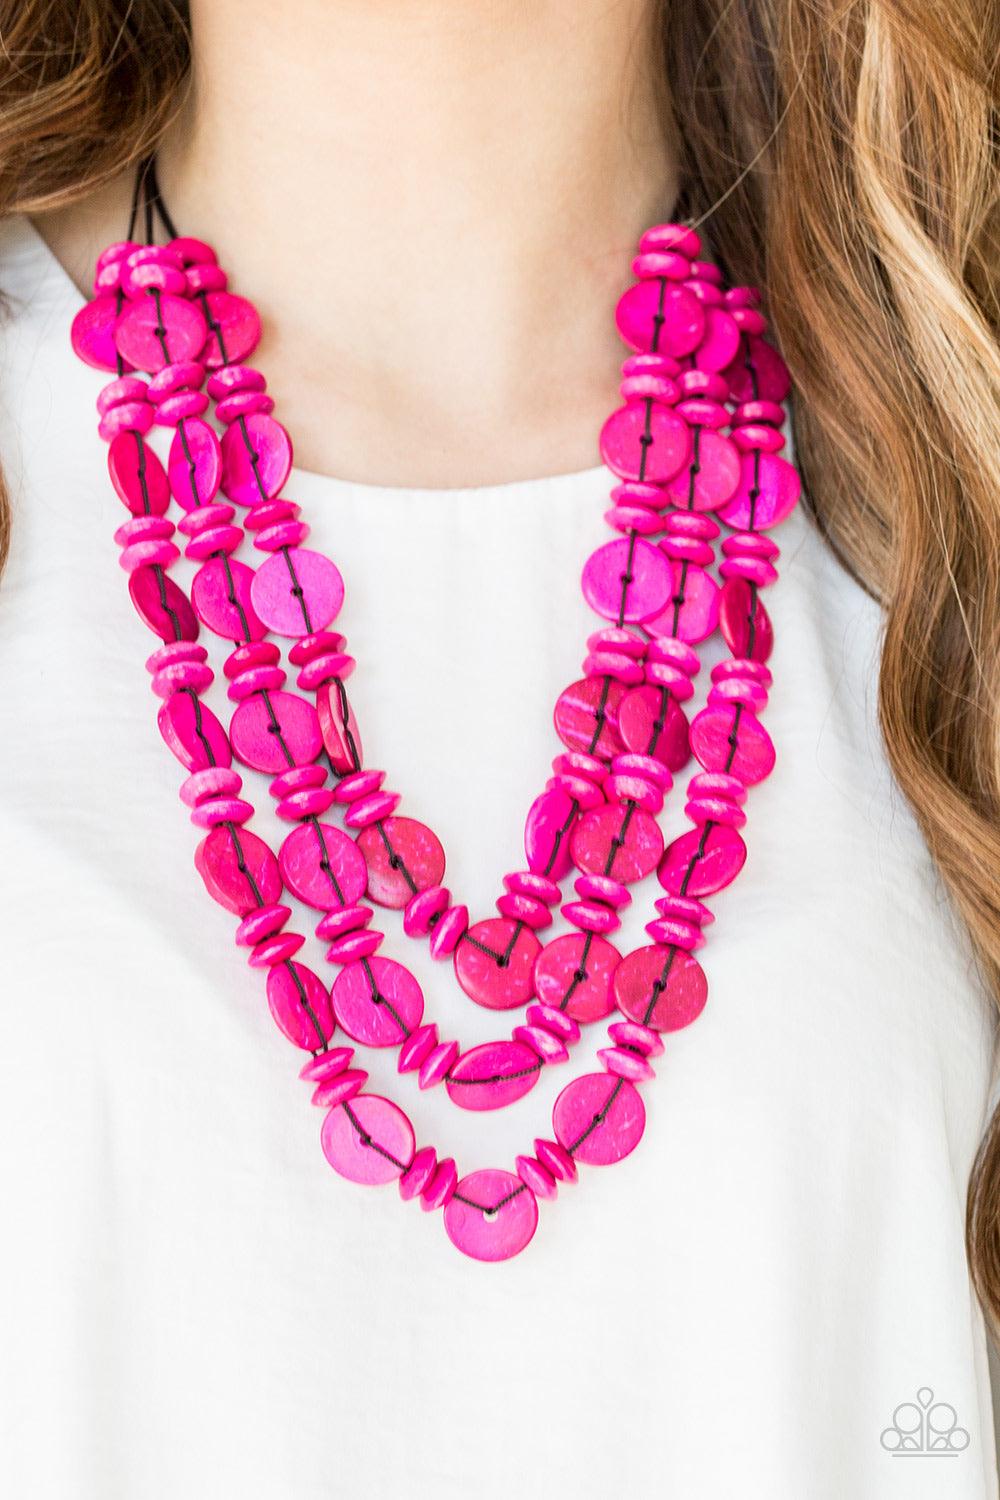 Paparazzi Accessories Barbados Bopper - Pink Brushed in a colorful finish, rows of vivacious pink wooden beads and discs are threaded along shiny brown cording for a summery look. Features a button loop closure. Sold as one individual necklace. Includes o